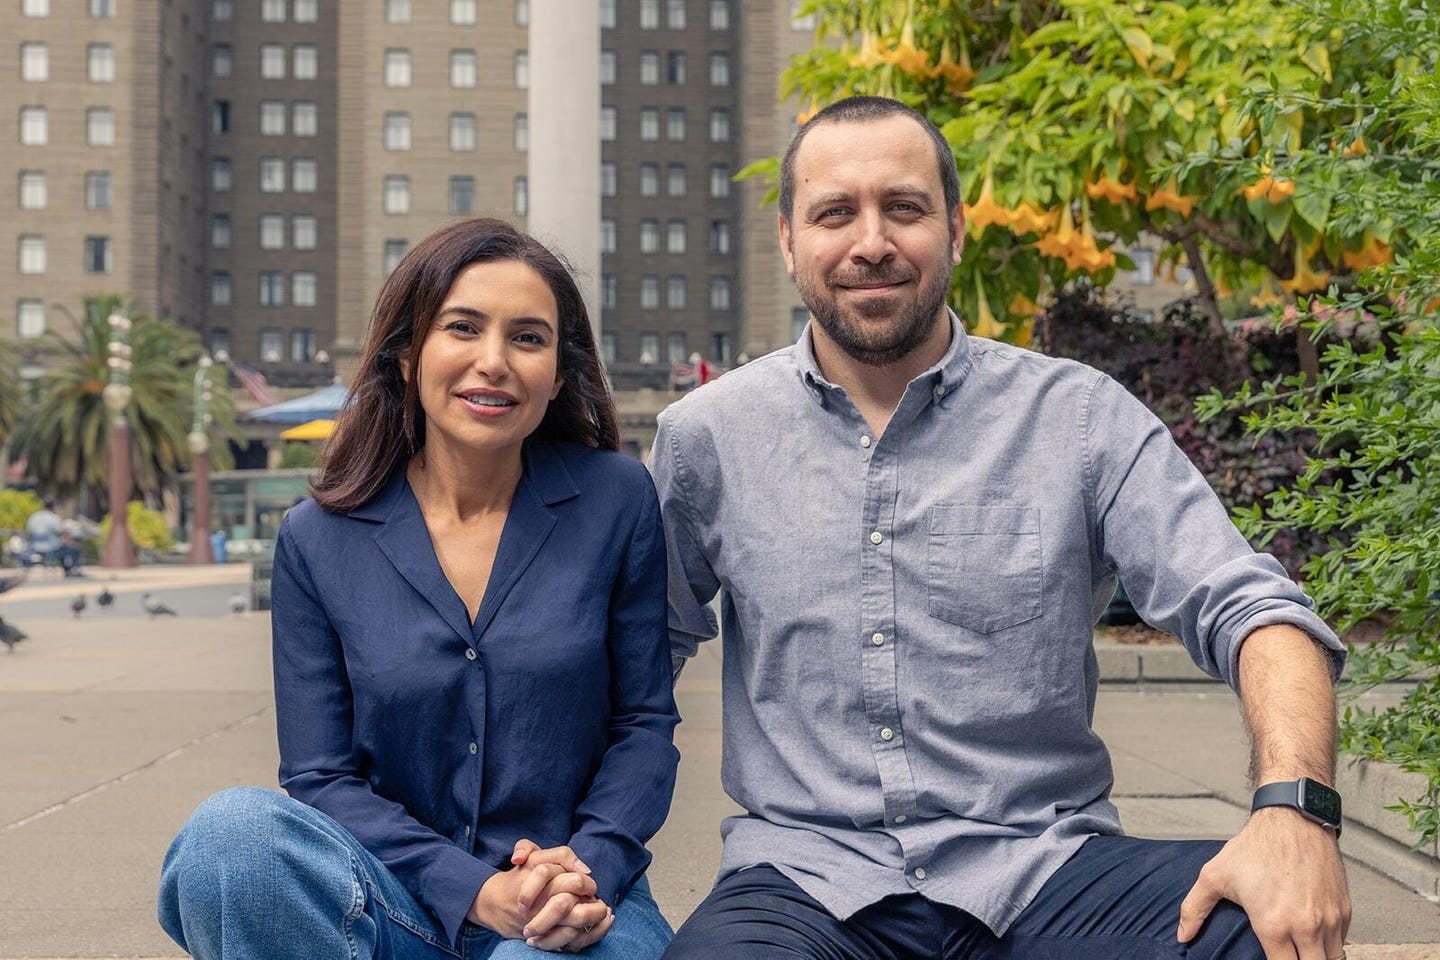 May Habib, cofounder and CEO at Writer (left) and Waseem Alshikh, cofounder and CTO at Writer (right) have raised $100 million in a Series B funding round led by Iconiq Capital. 